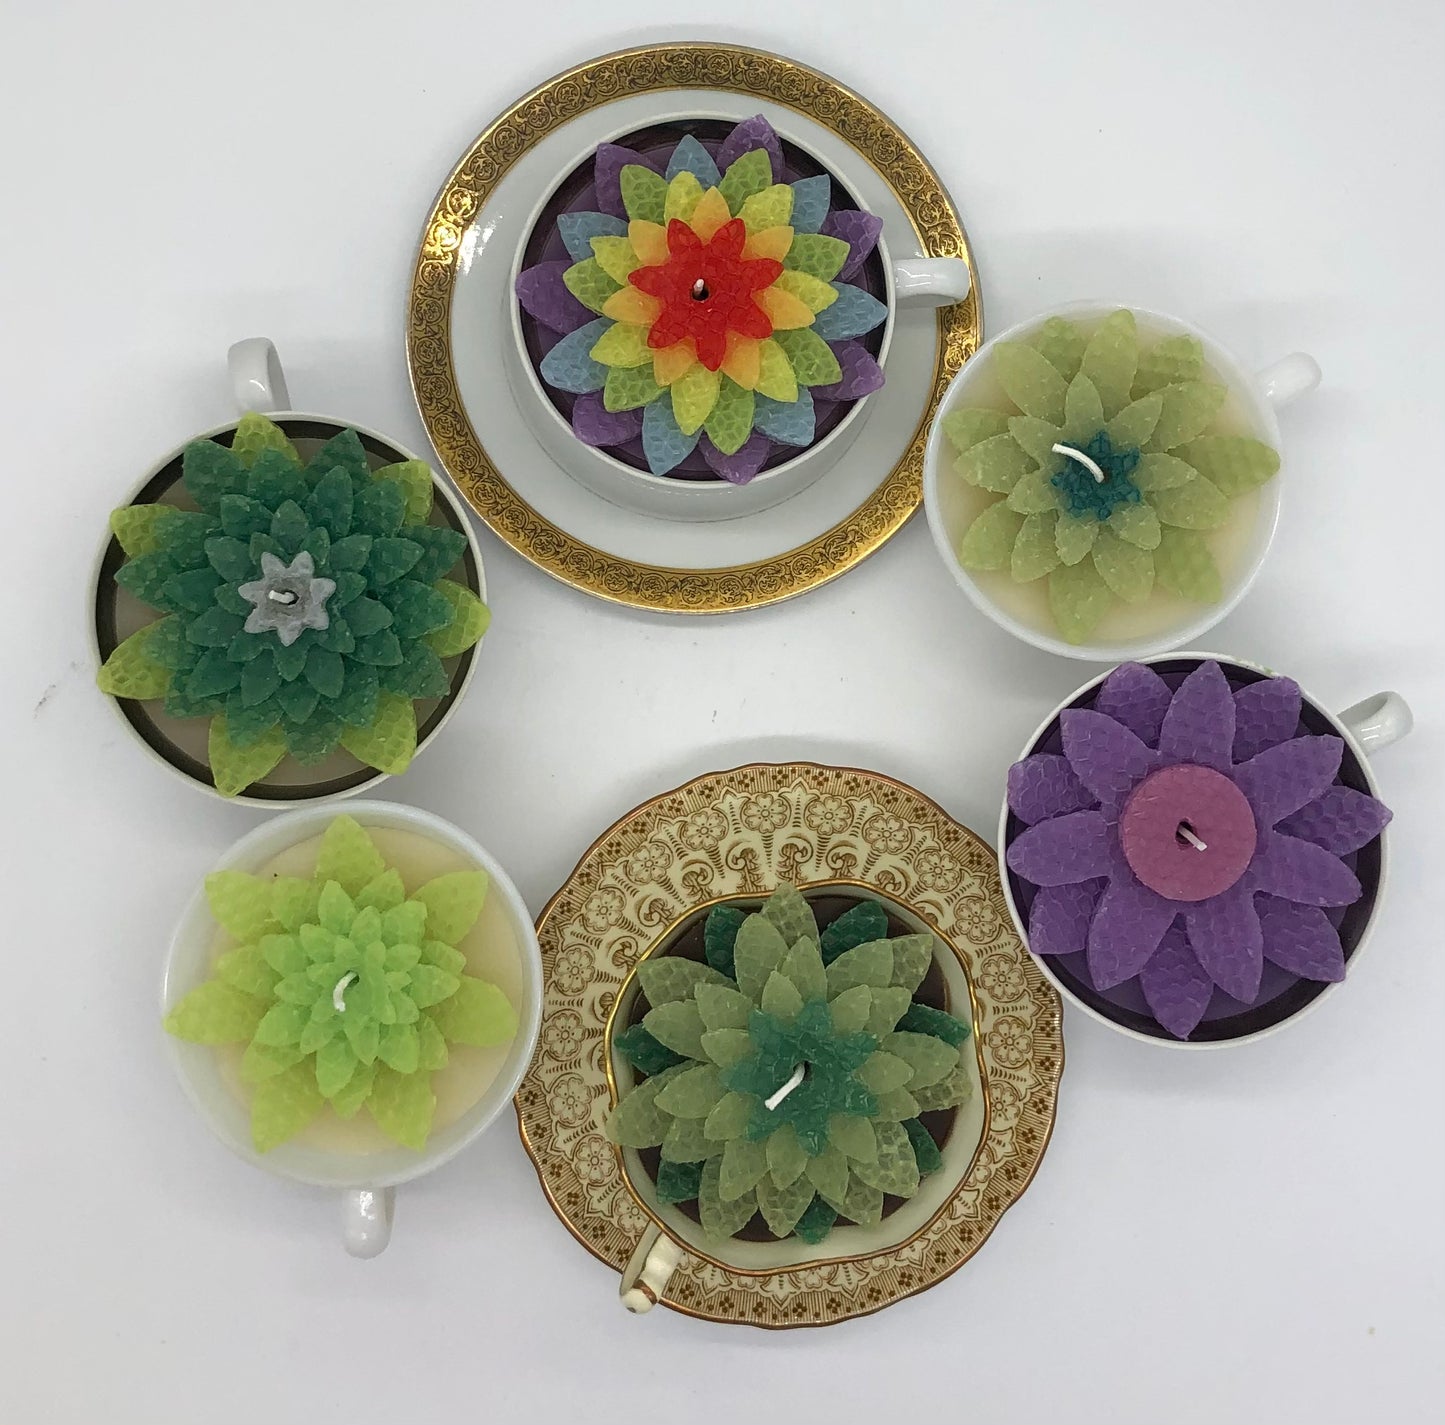 Top view of seven teacup candles.